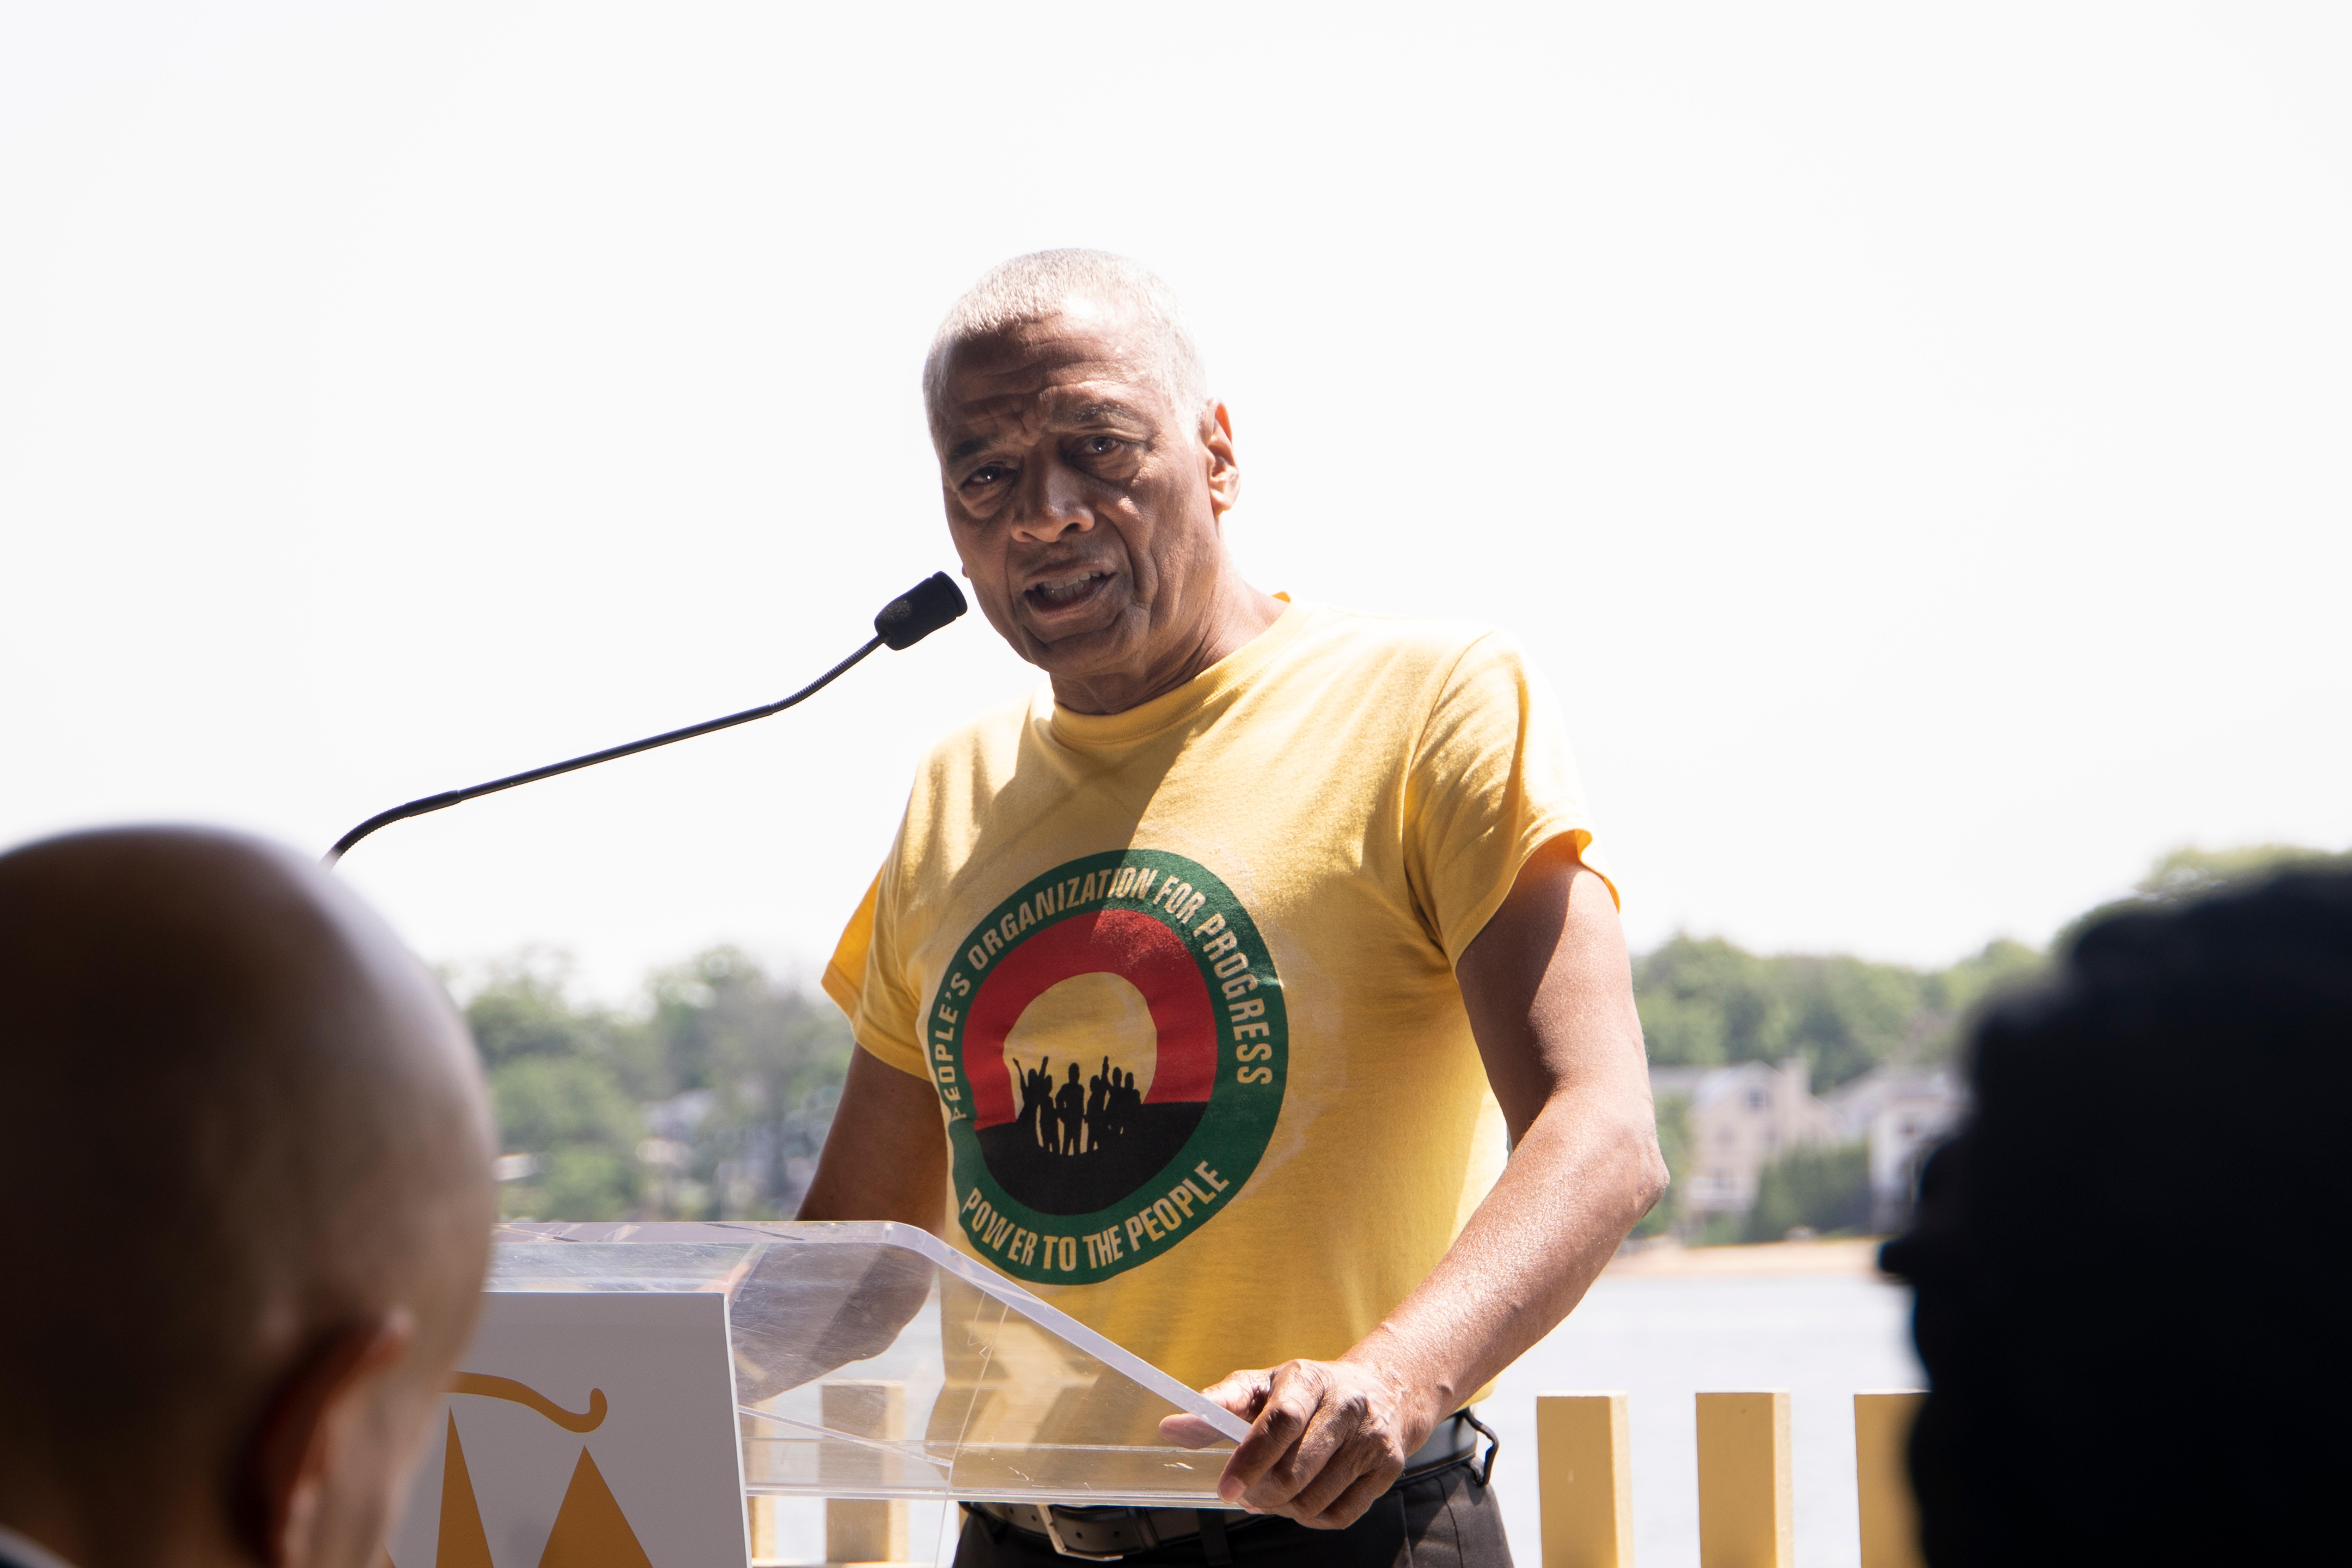 Larry Hamm,  the chairman of the People's Organization for Progress gives a speech at the launching of the Reparations Council at the Perth Amboy Ferry Slip in New Jersey on Monday, June 19, 2023.